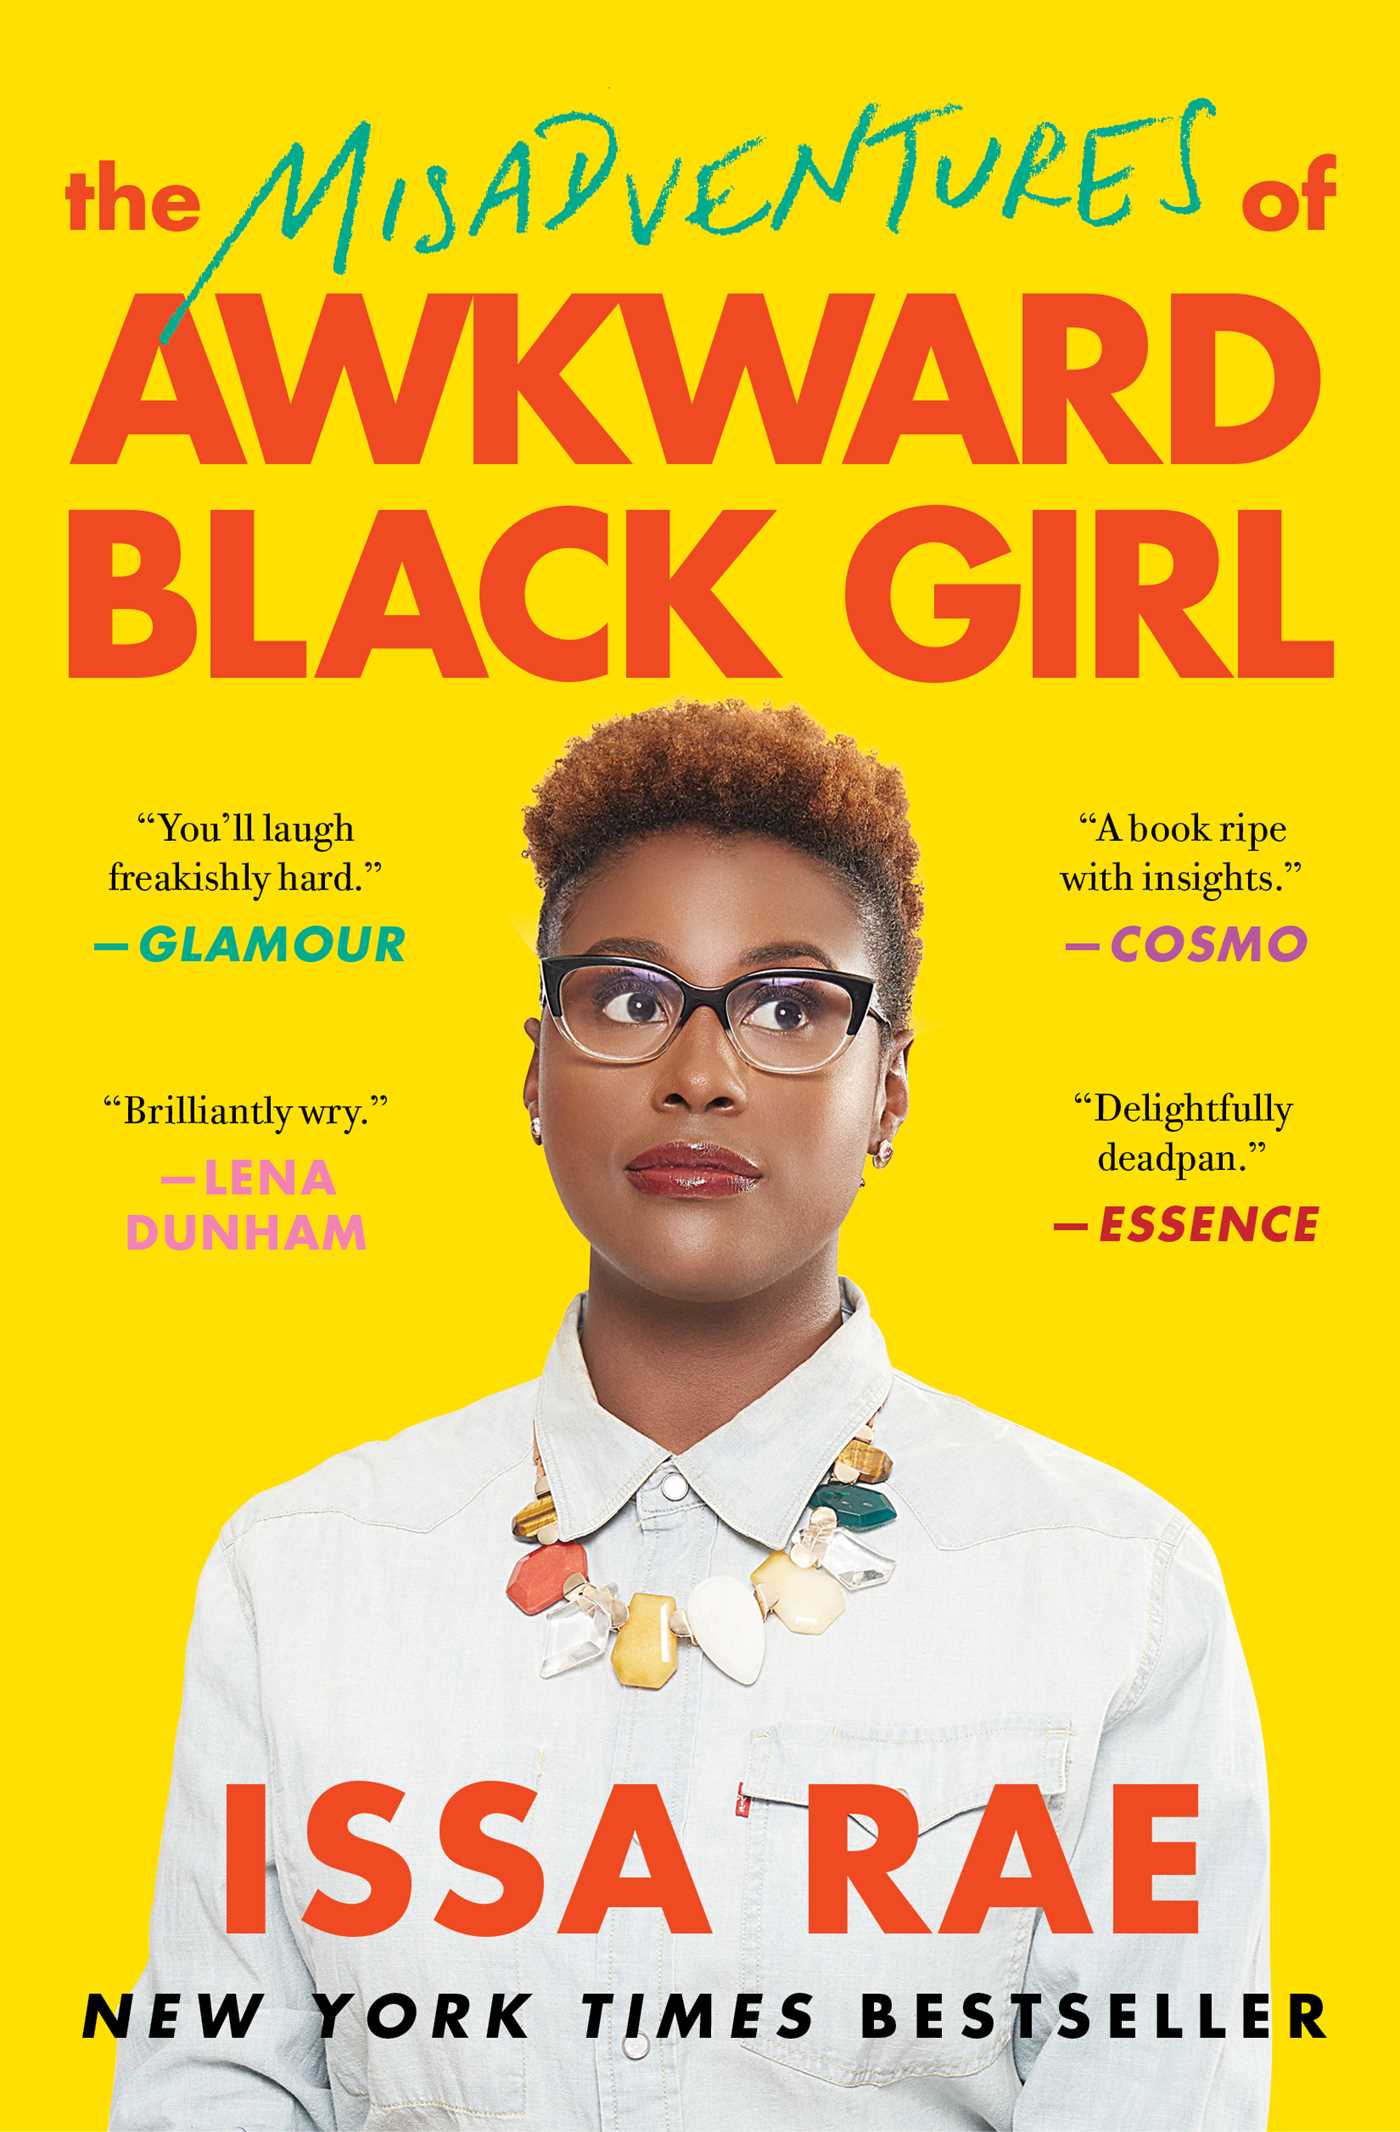 8. ‘The Misadventures of Awkward Black Girl’ by Issa Rae